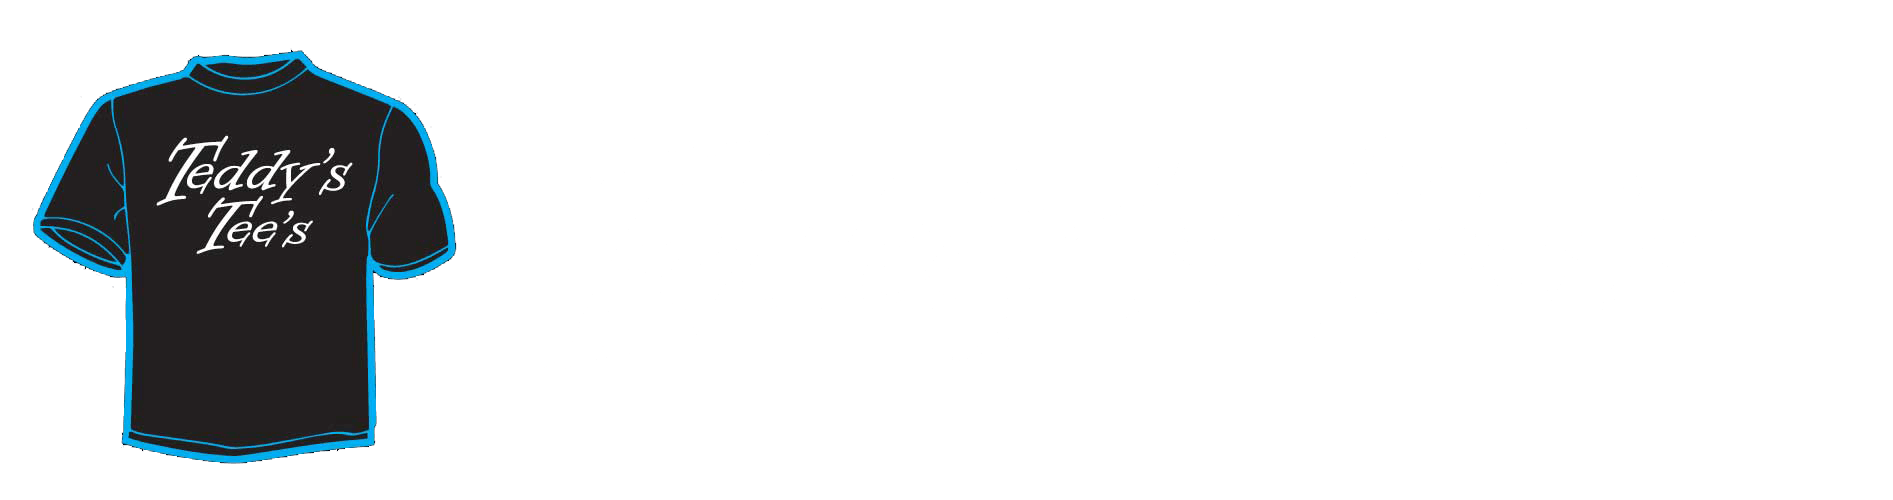 Teddy's Tees | Screenprinting Service in Concord, NH